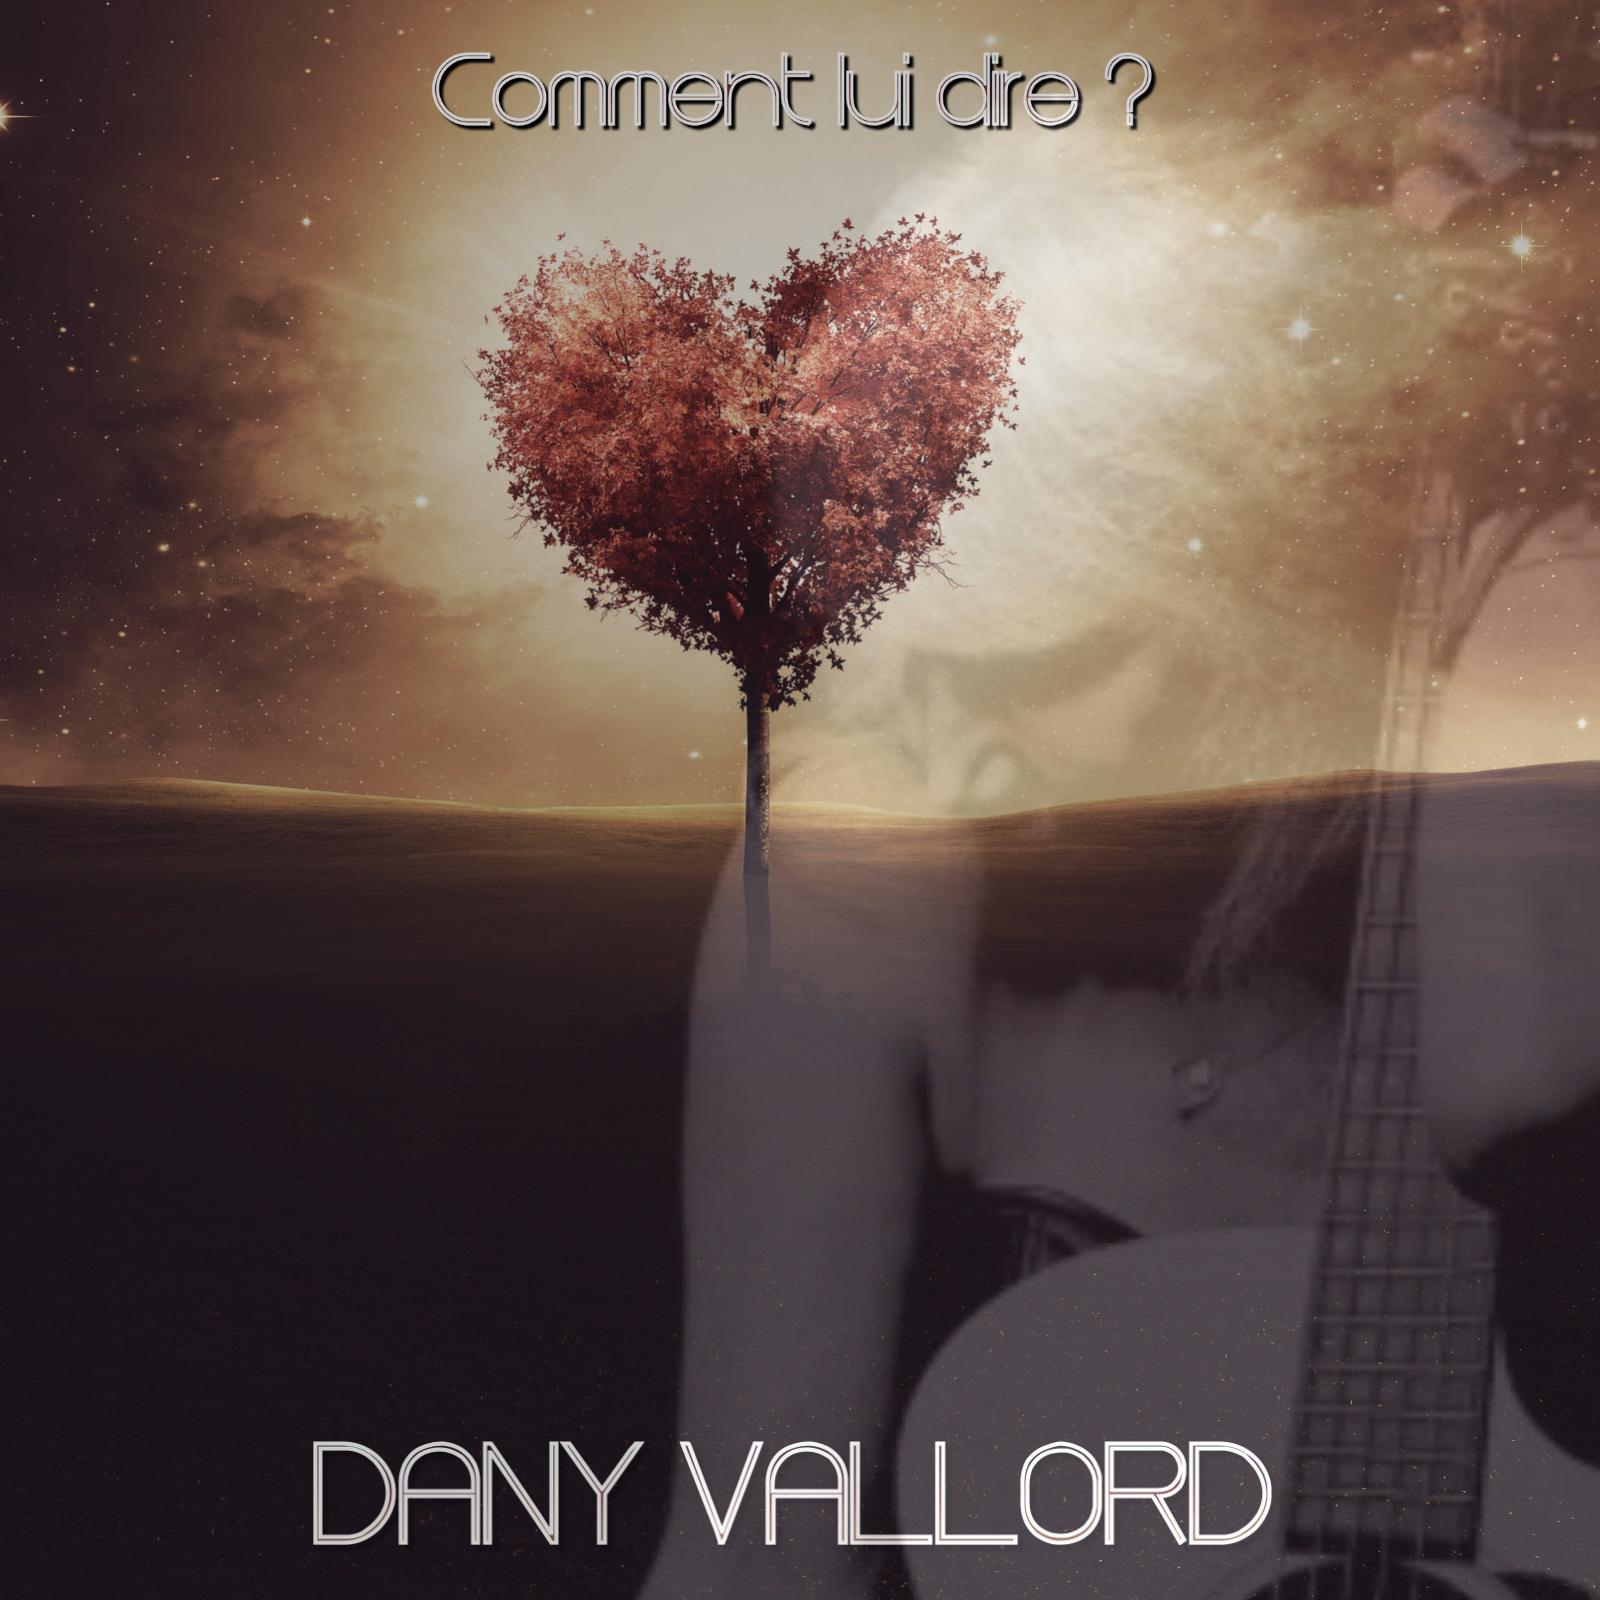 Dany Vallord - Comment lui dire ?